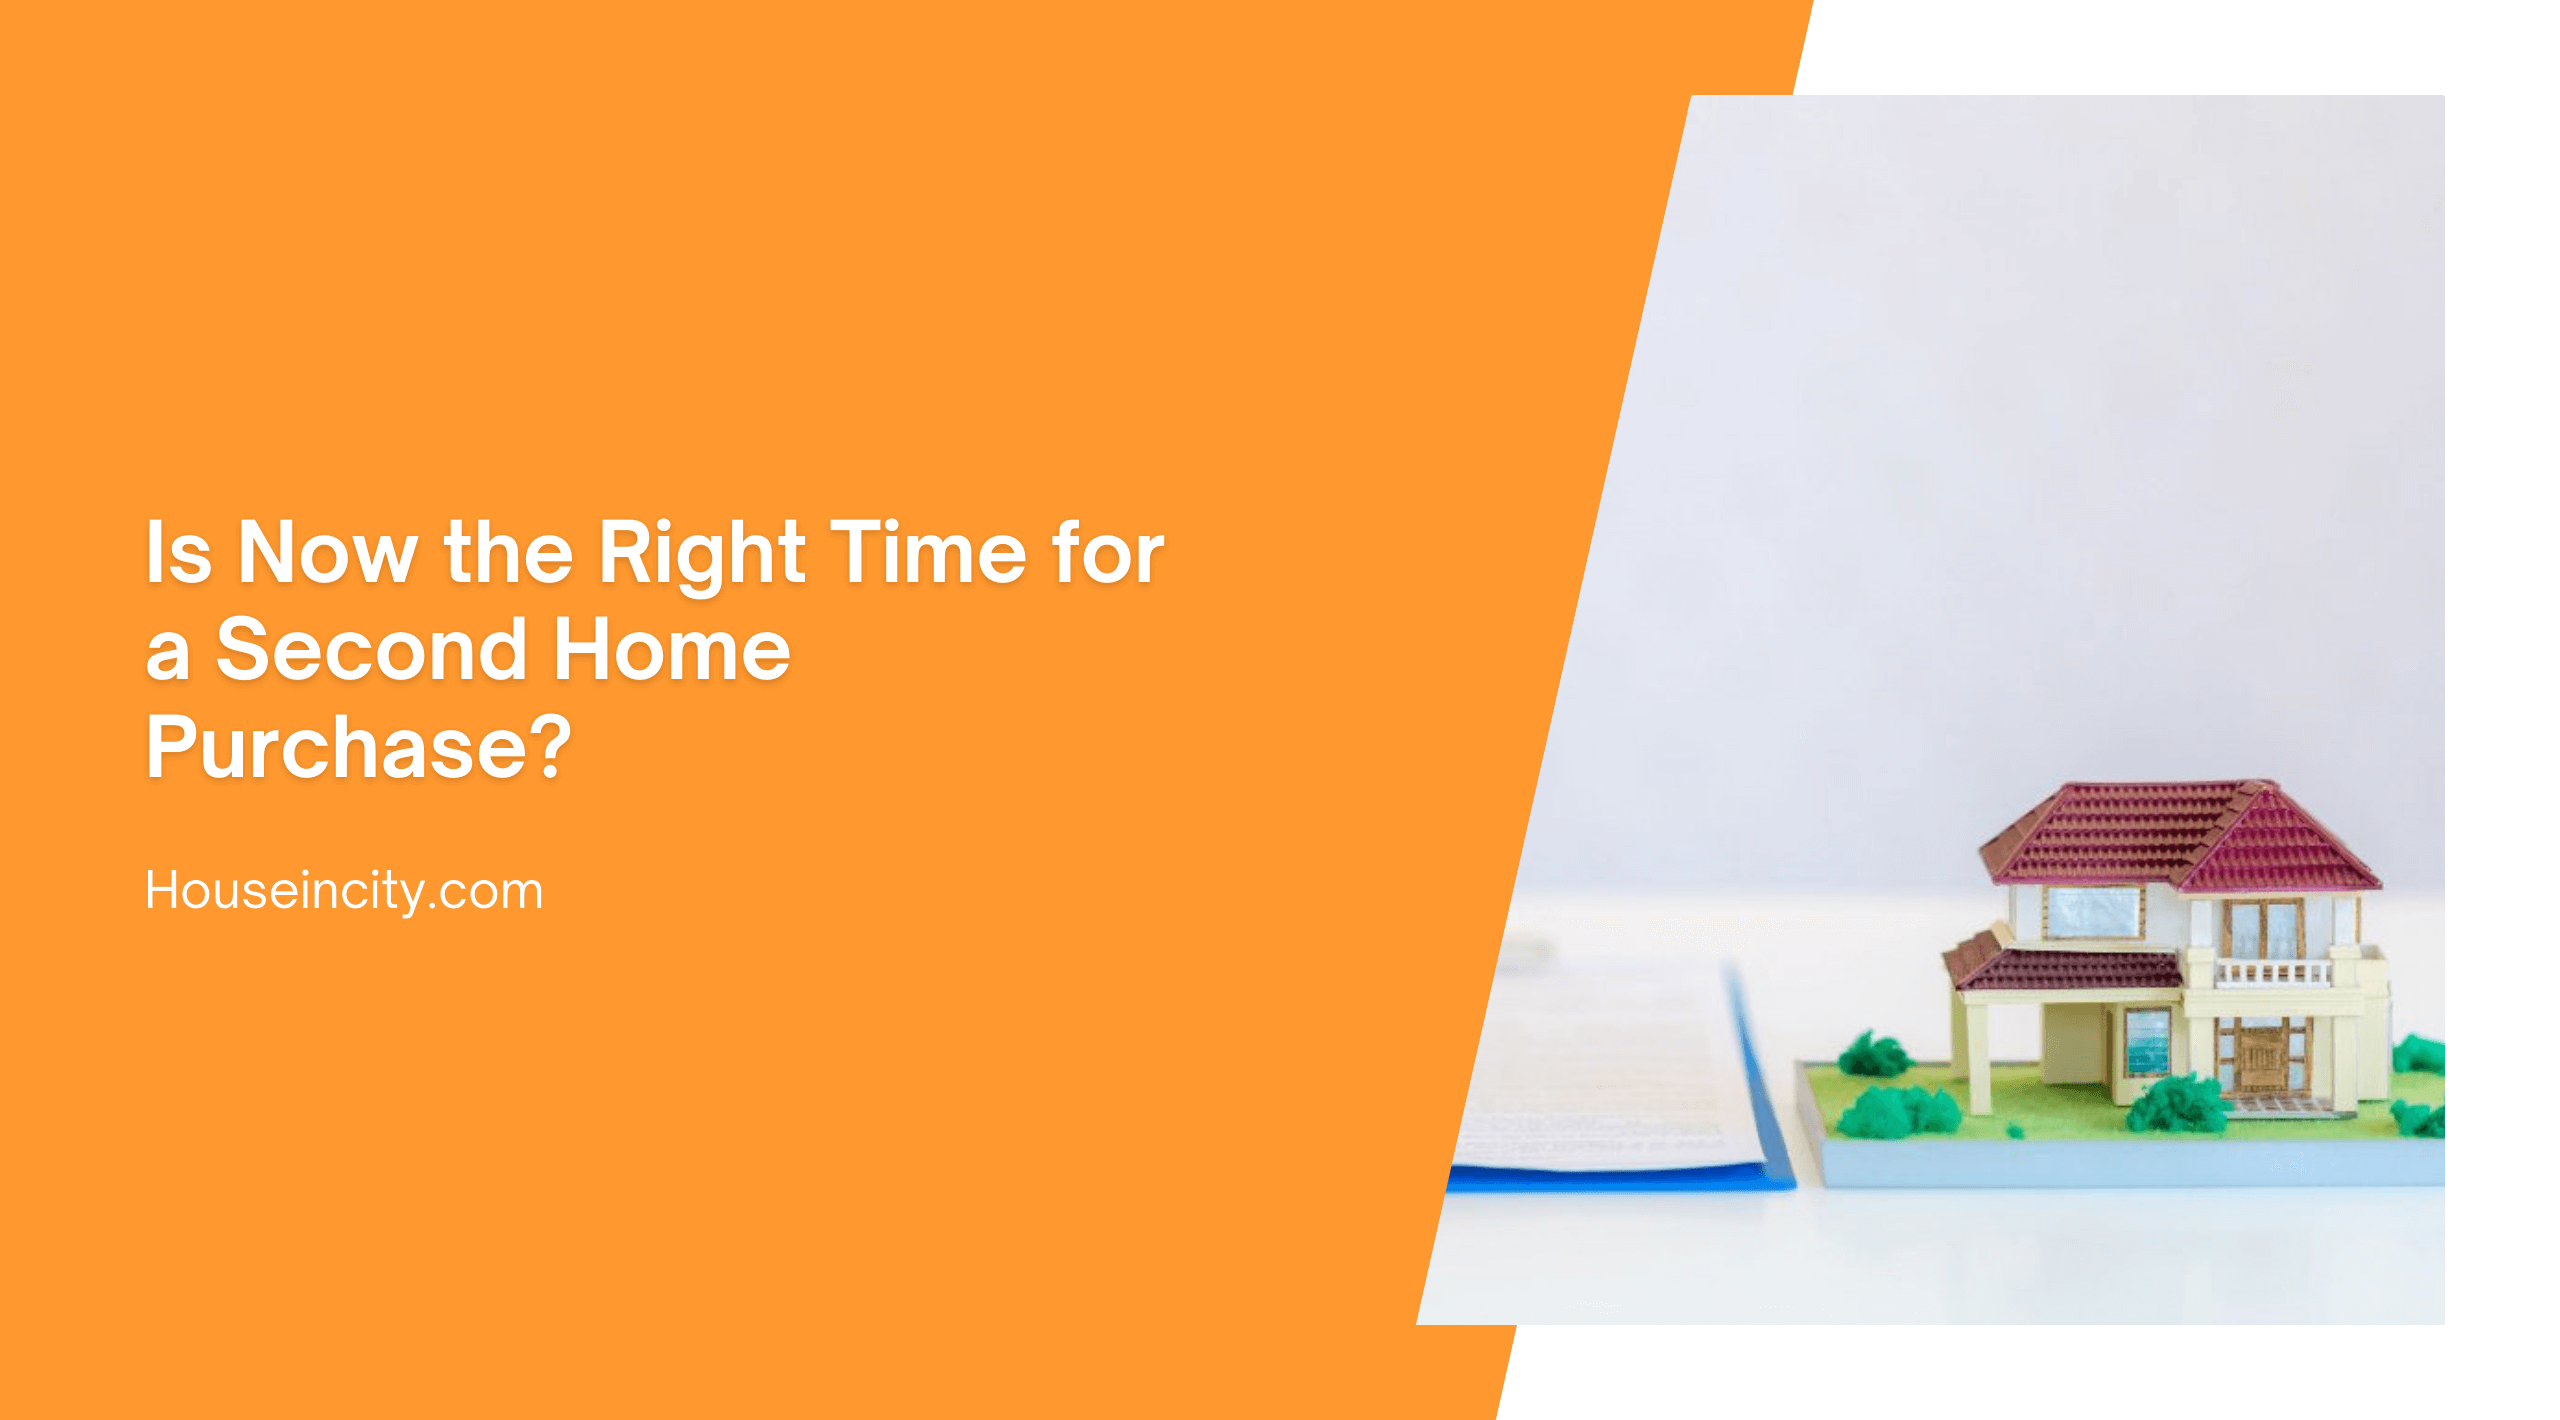 Is Now the Right Time for a Second Home Purchase?